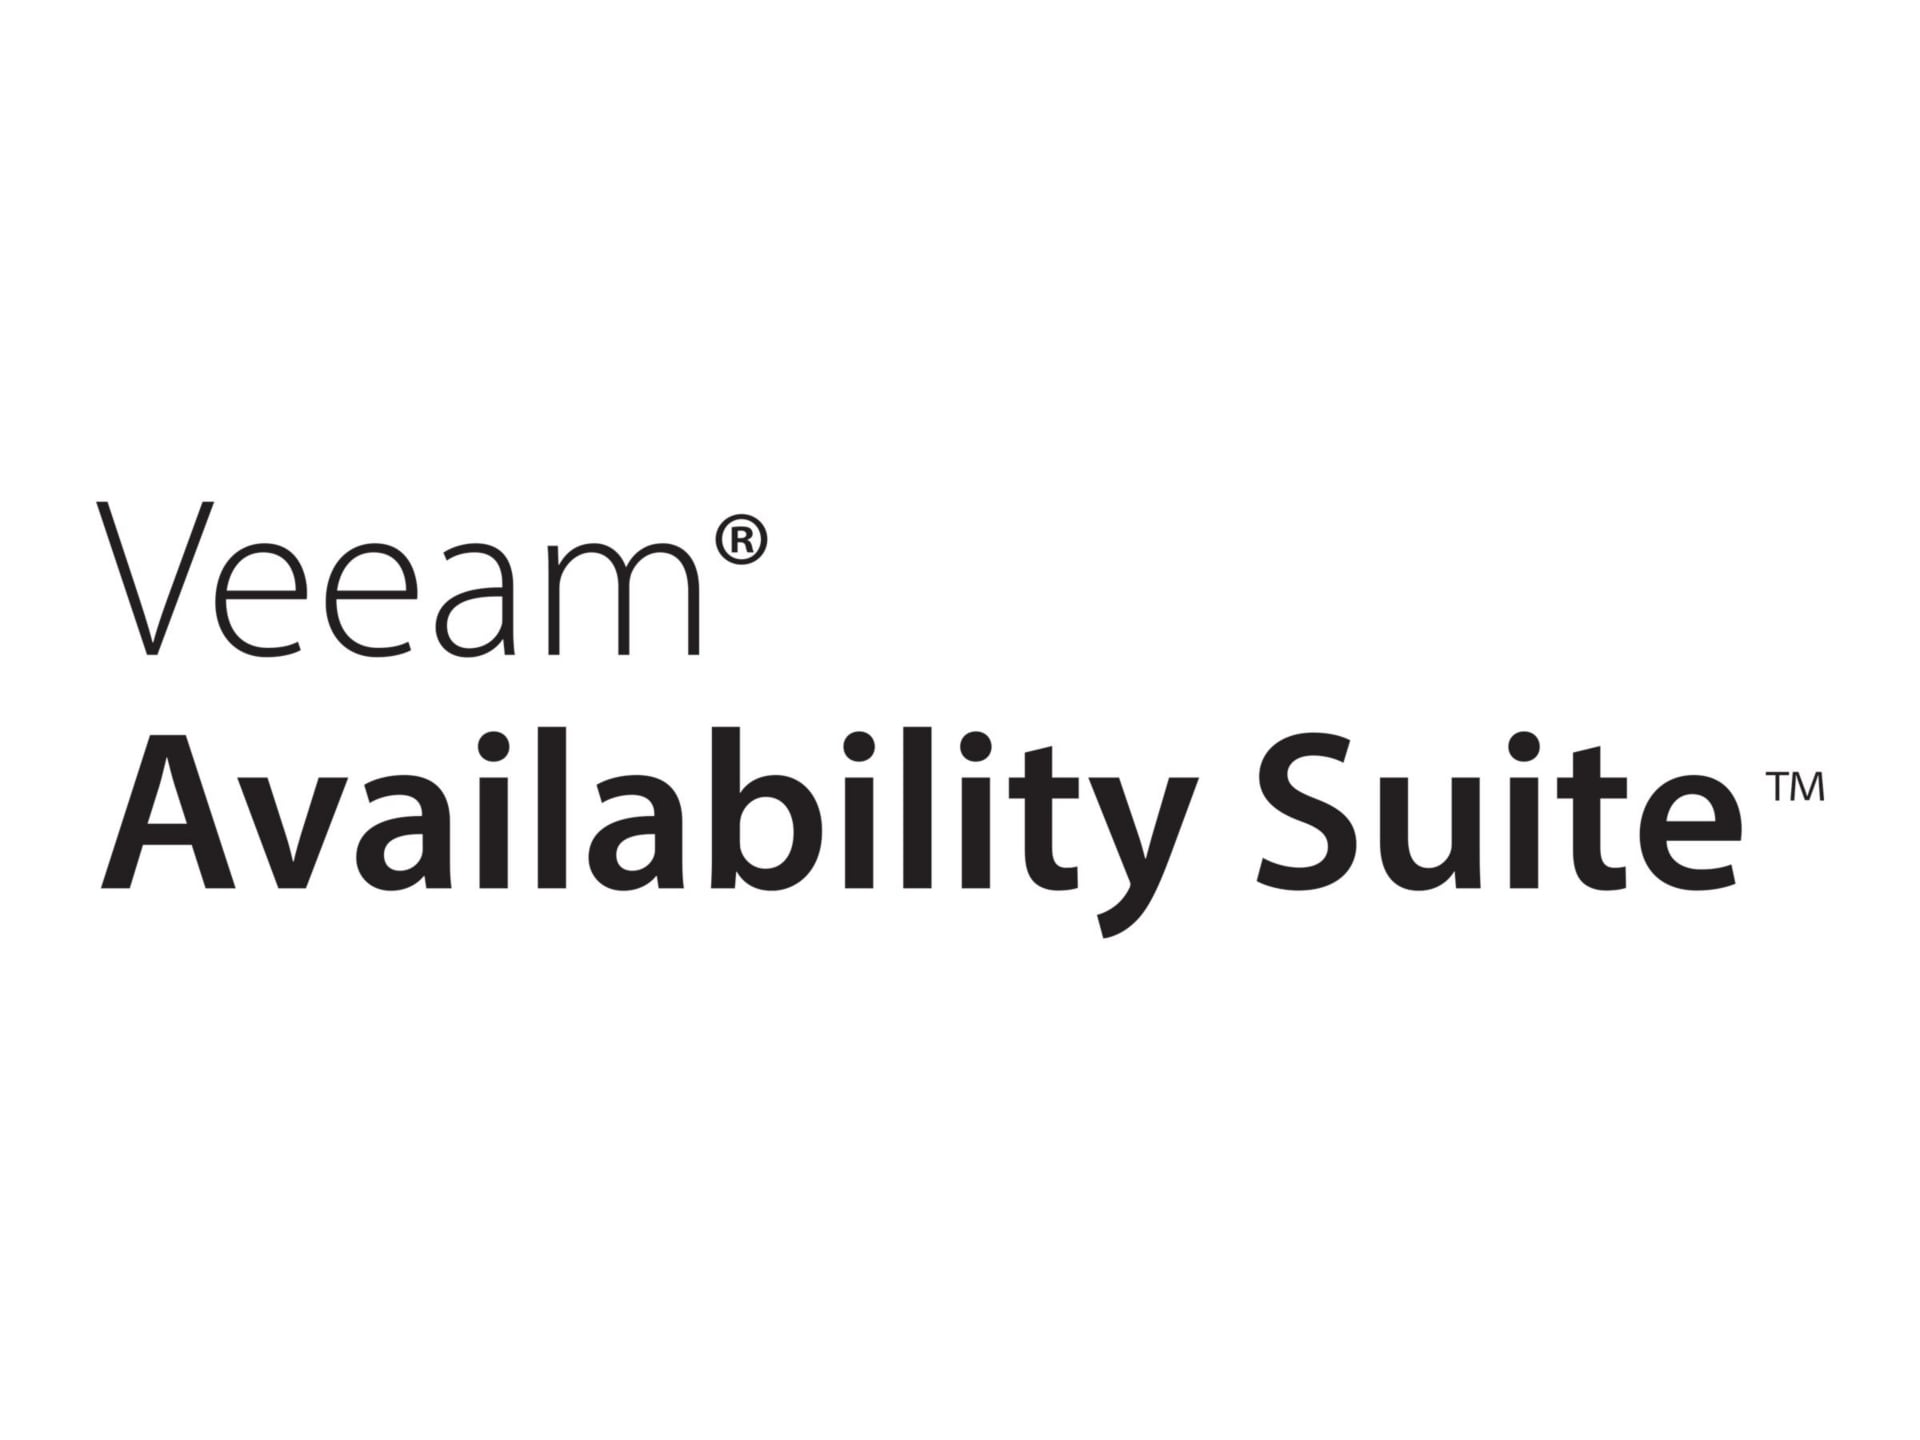 Veeam Availability Suite Universal License - Annual Billing License (1st ye